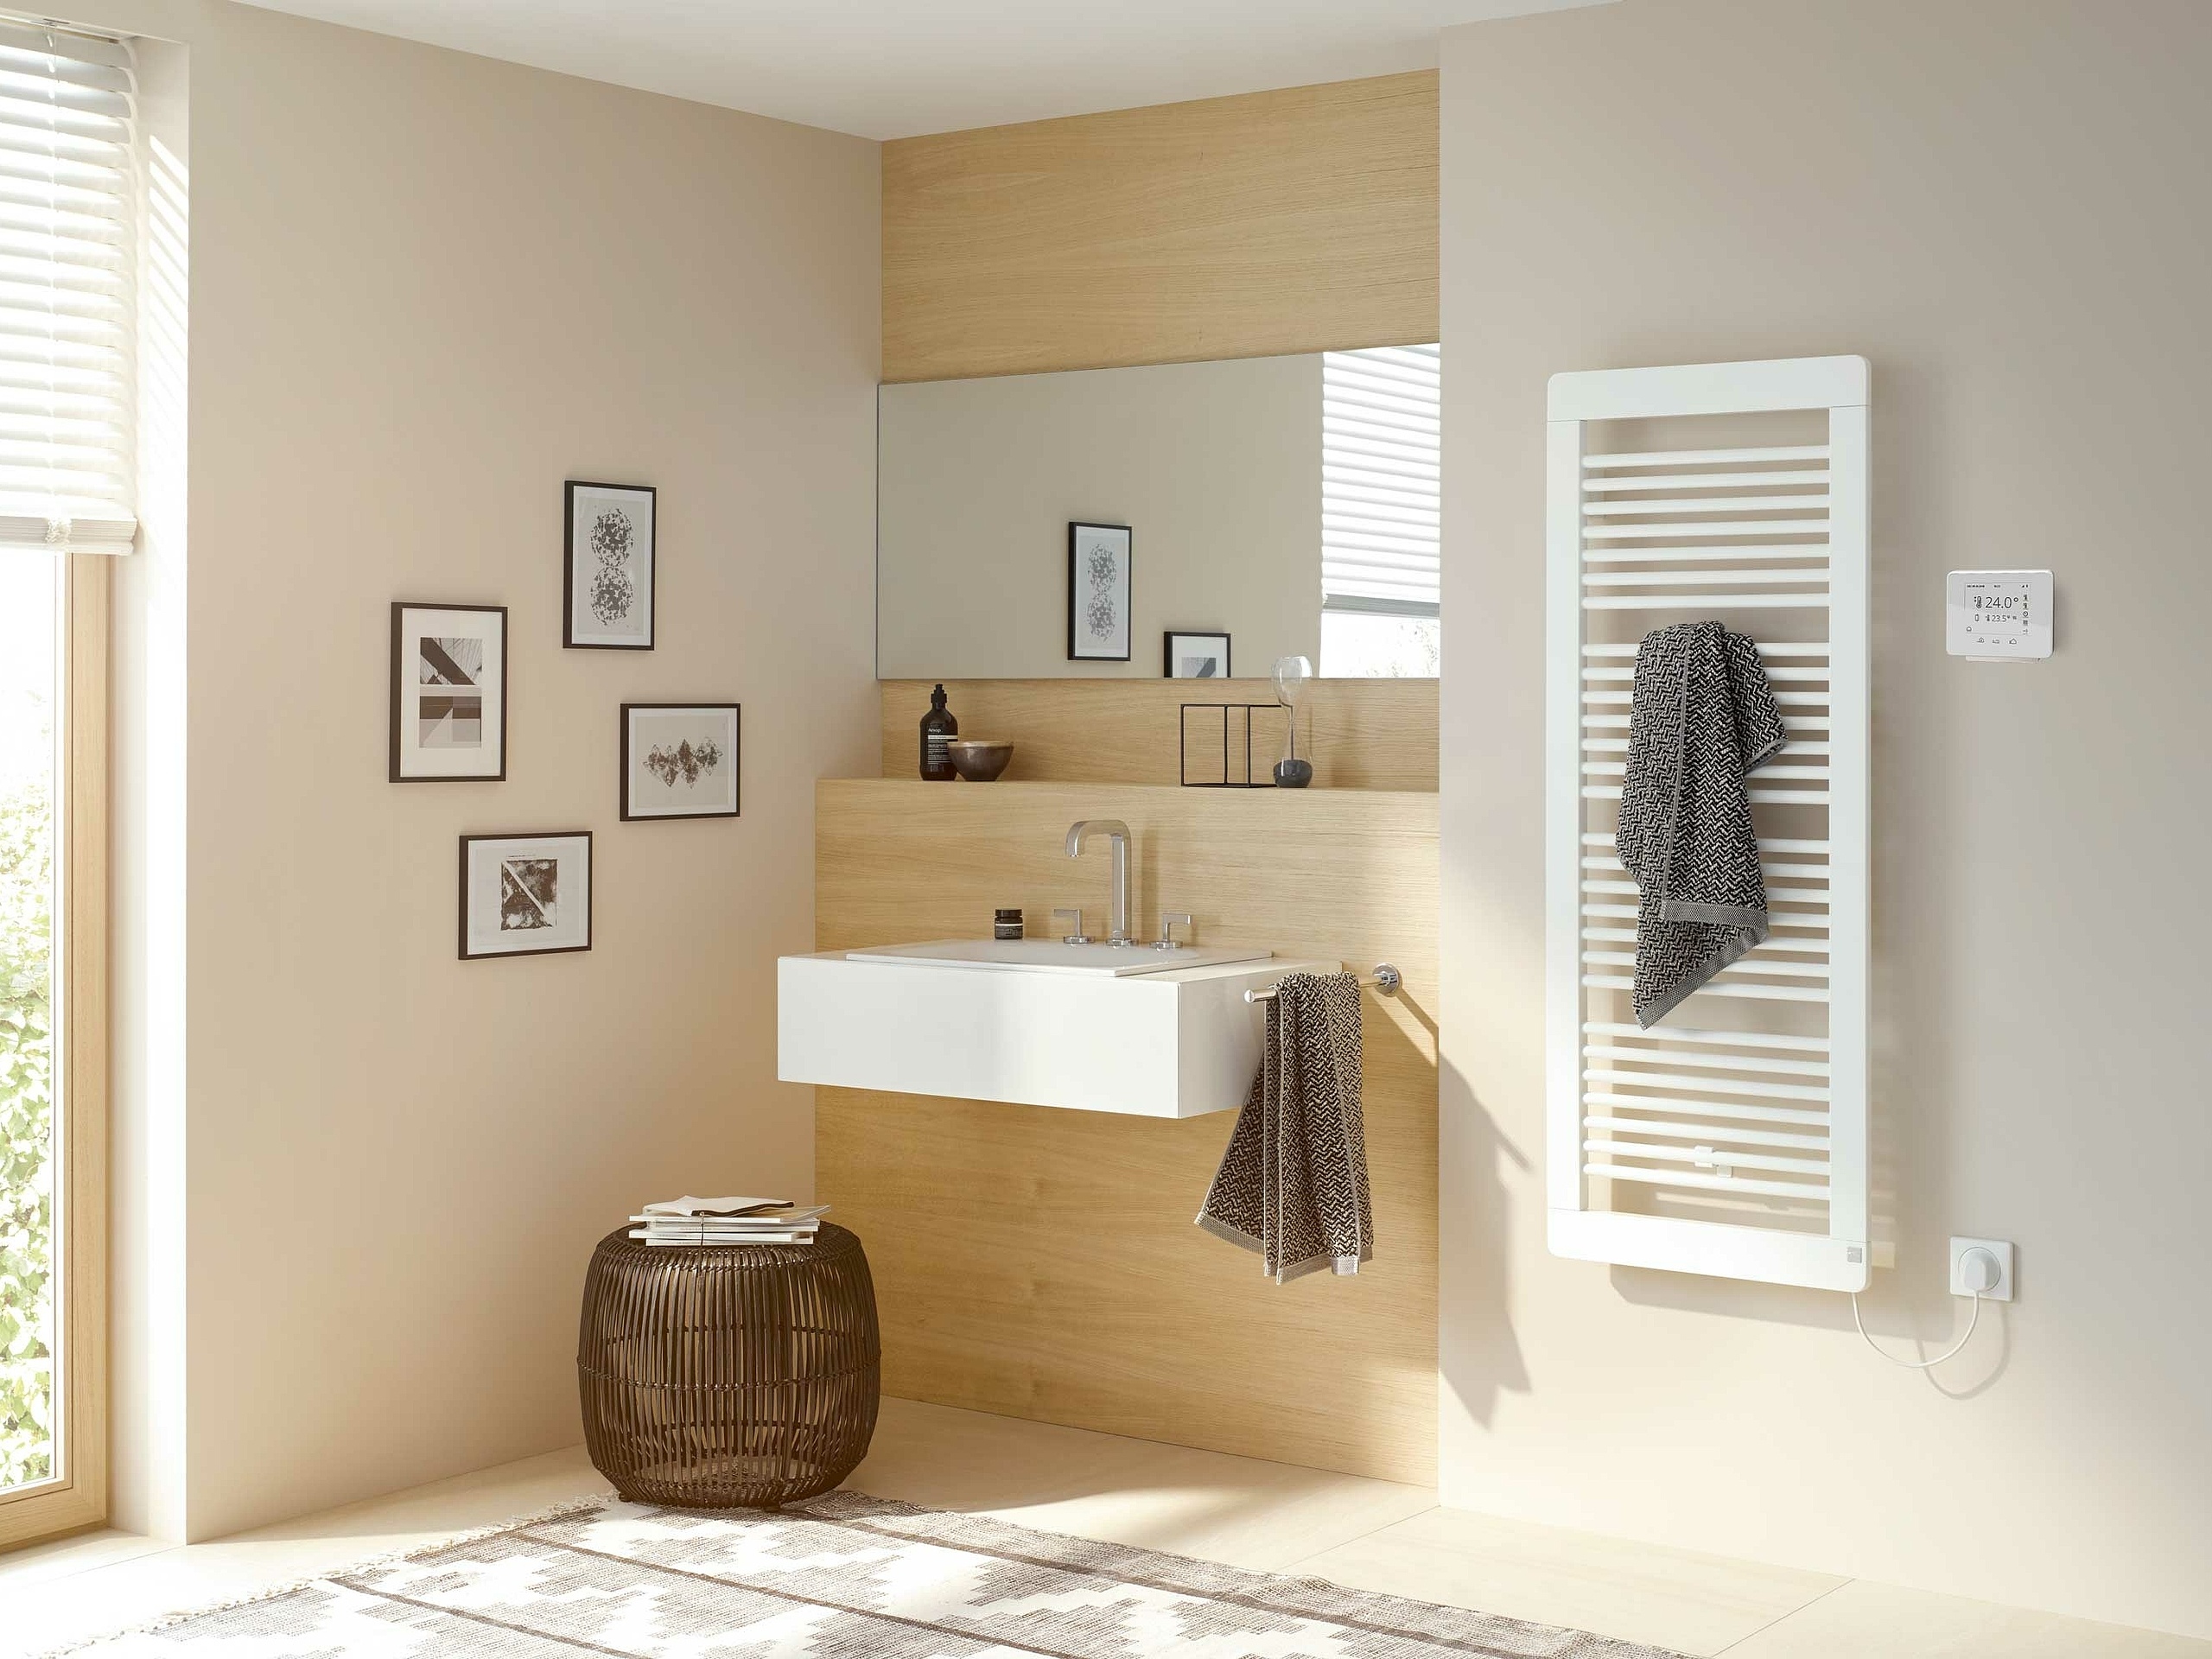 The Kermi Credo plus design and bathroom radiator is also available in an electric version.